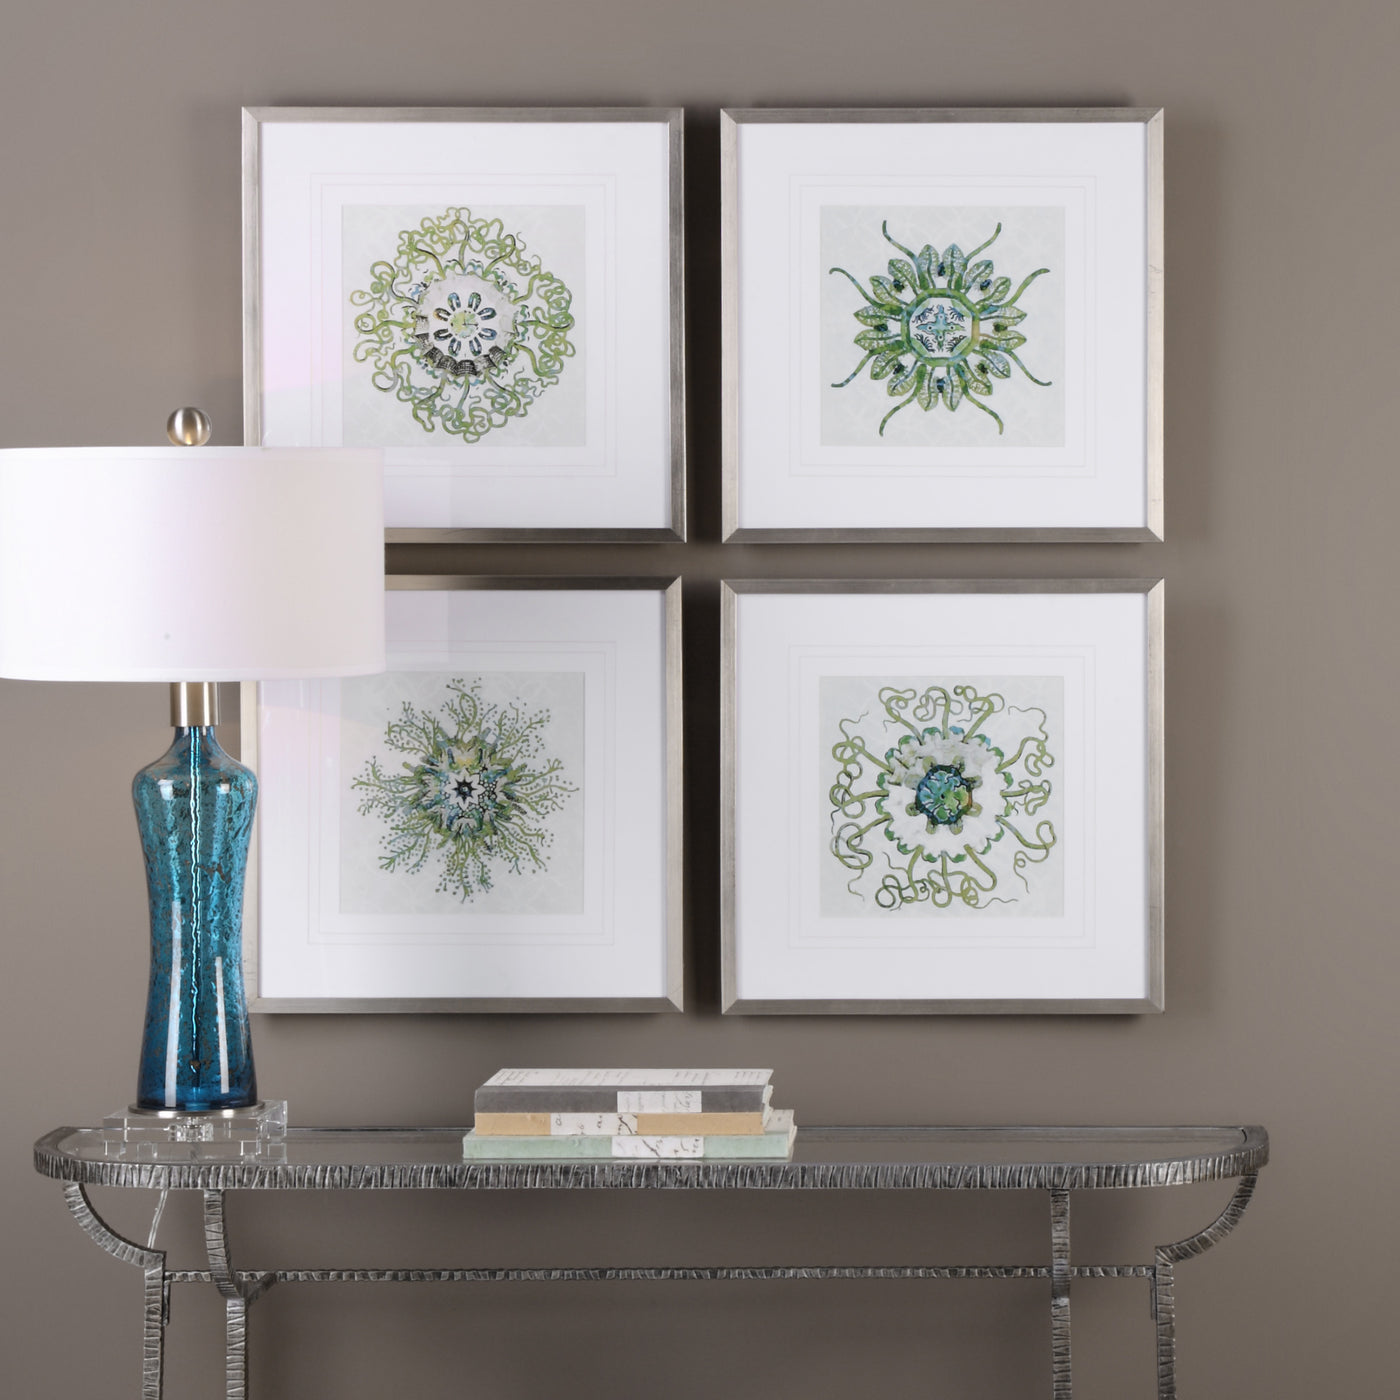 Reminiscent Of Spanish Tiles, These Intricately Designed Art Prints Add Contemporary Style To Any Space. Rich Shades Of Gr...